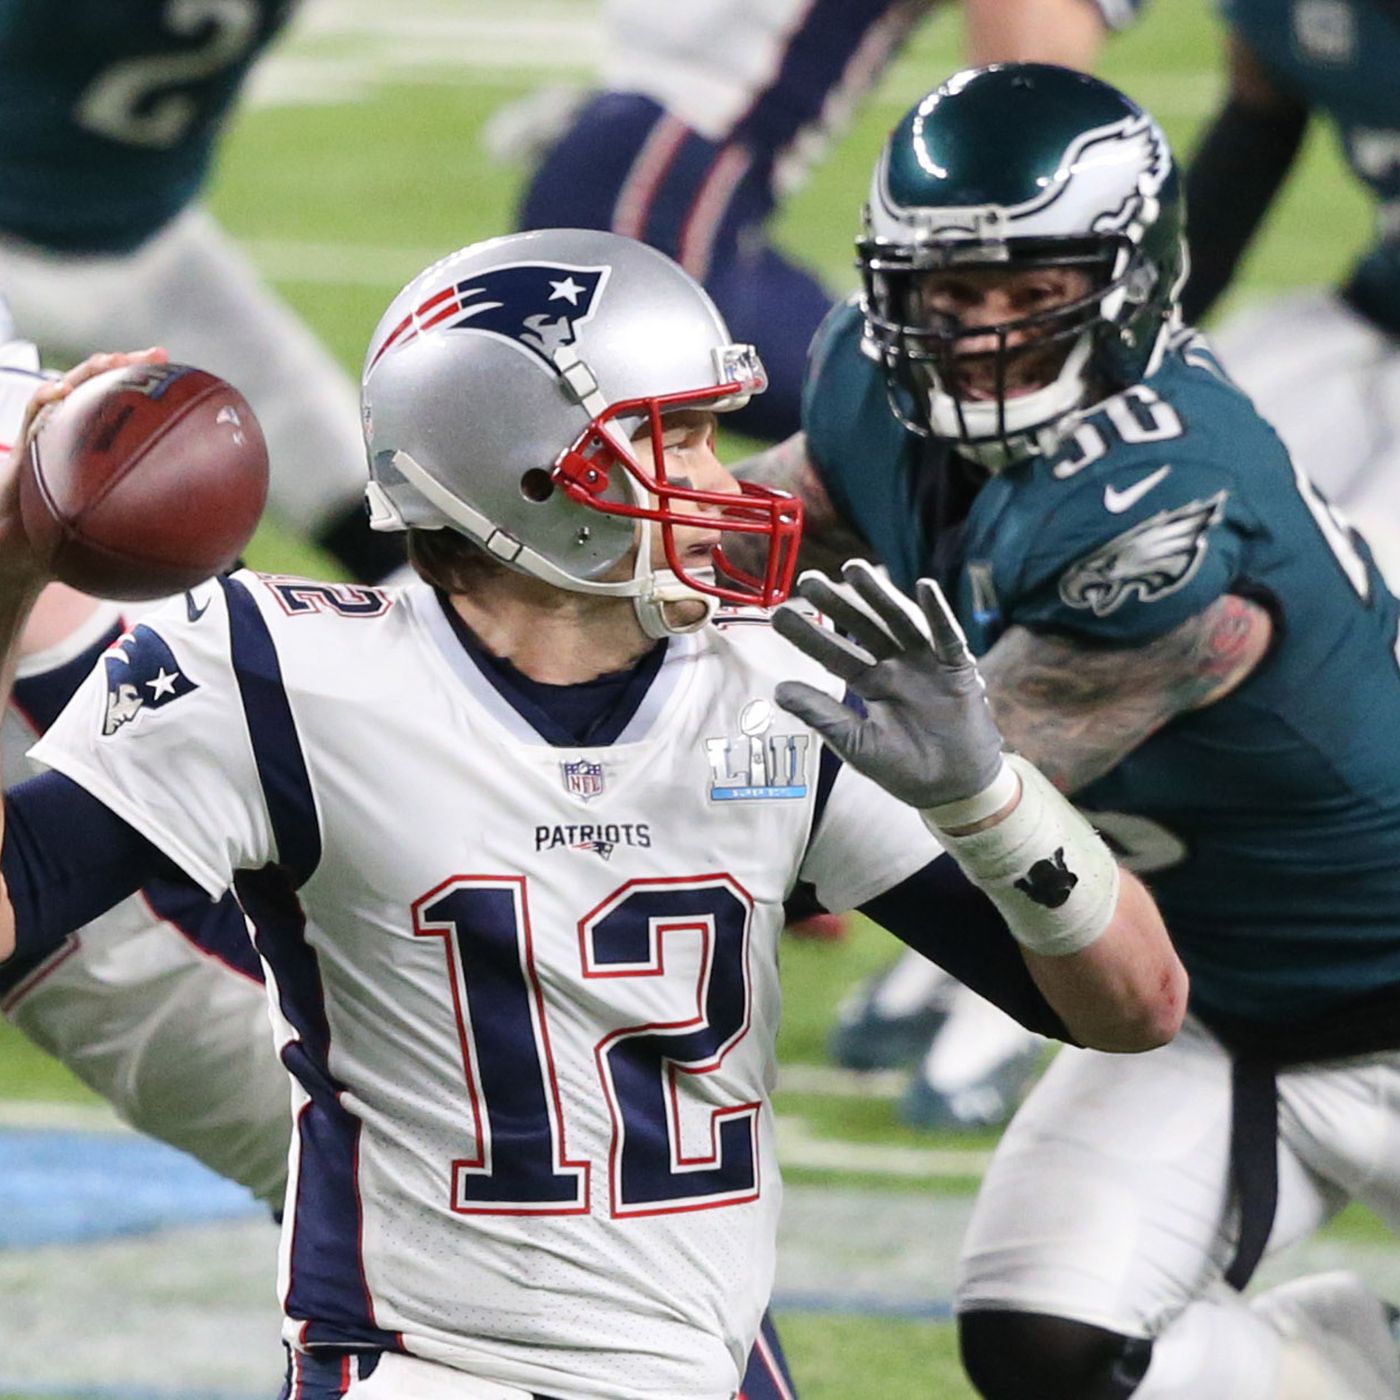 Eagles vs. Patriots live stream: TV channel, how to watch